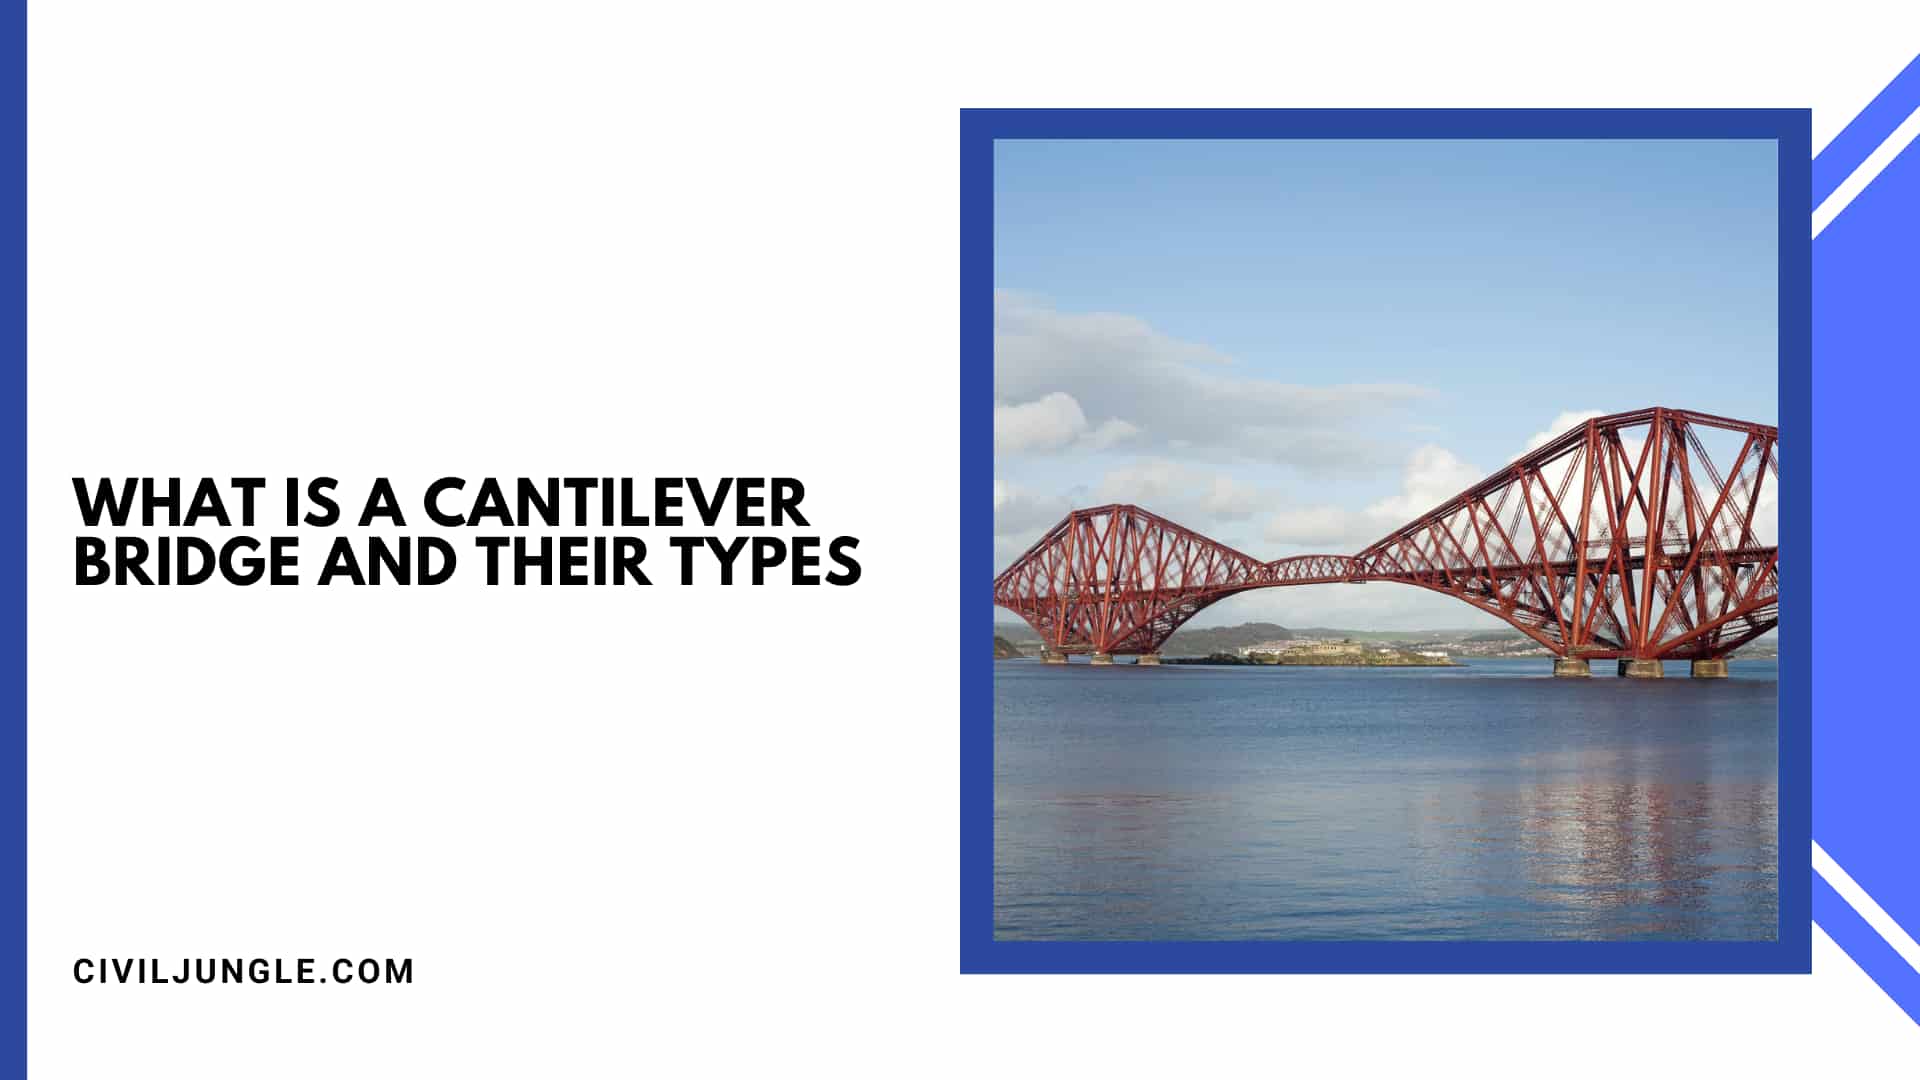 What Is a Cantilever Bridge And Their Types